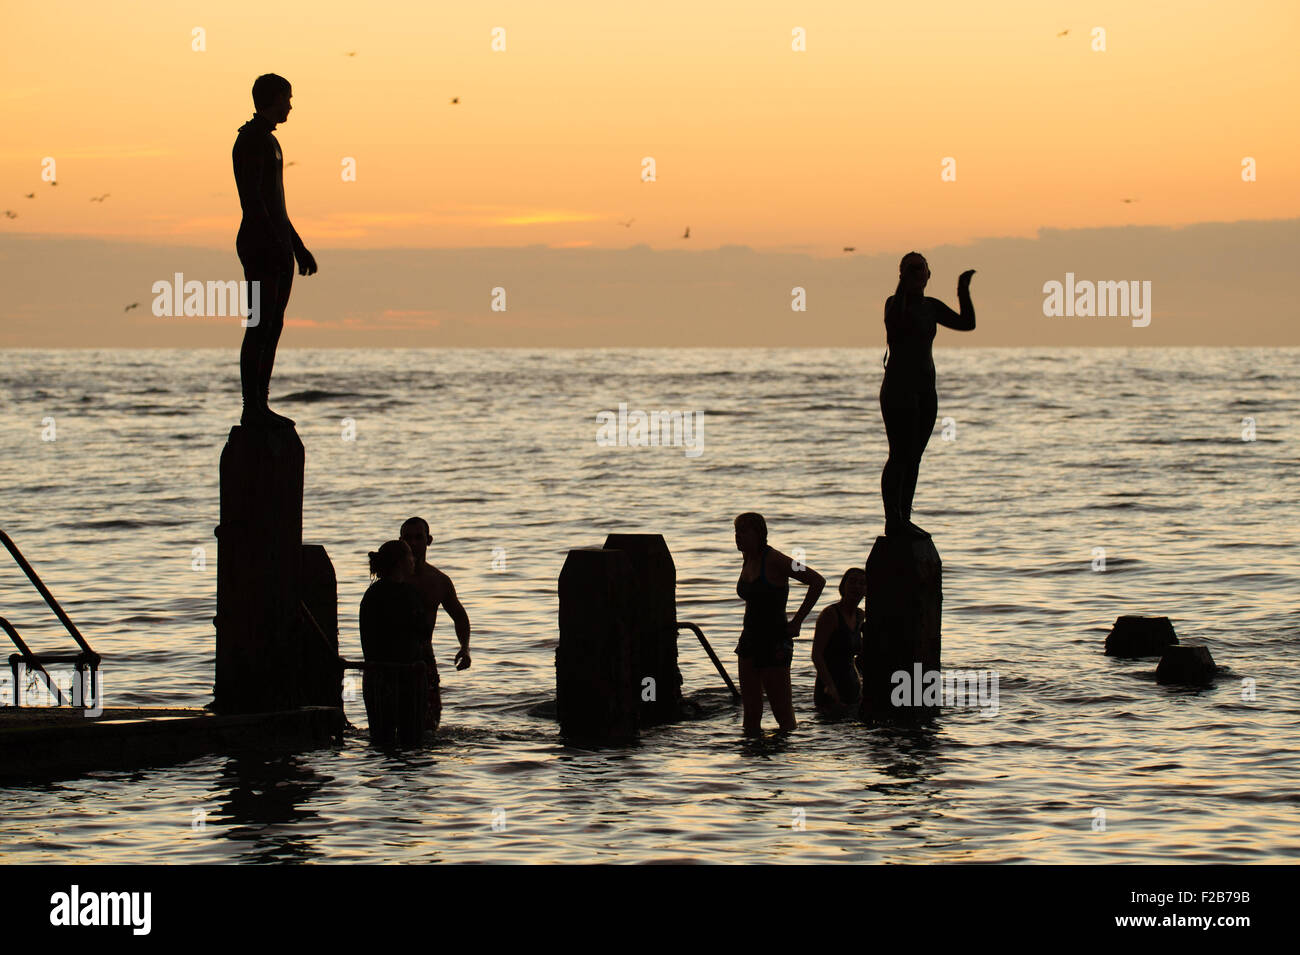 15th September Photos 15th September Images Alamy